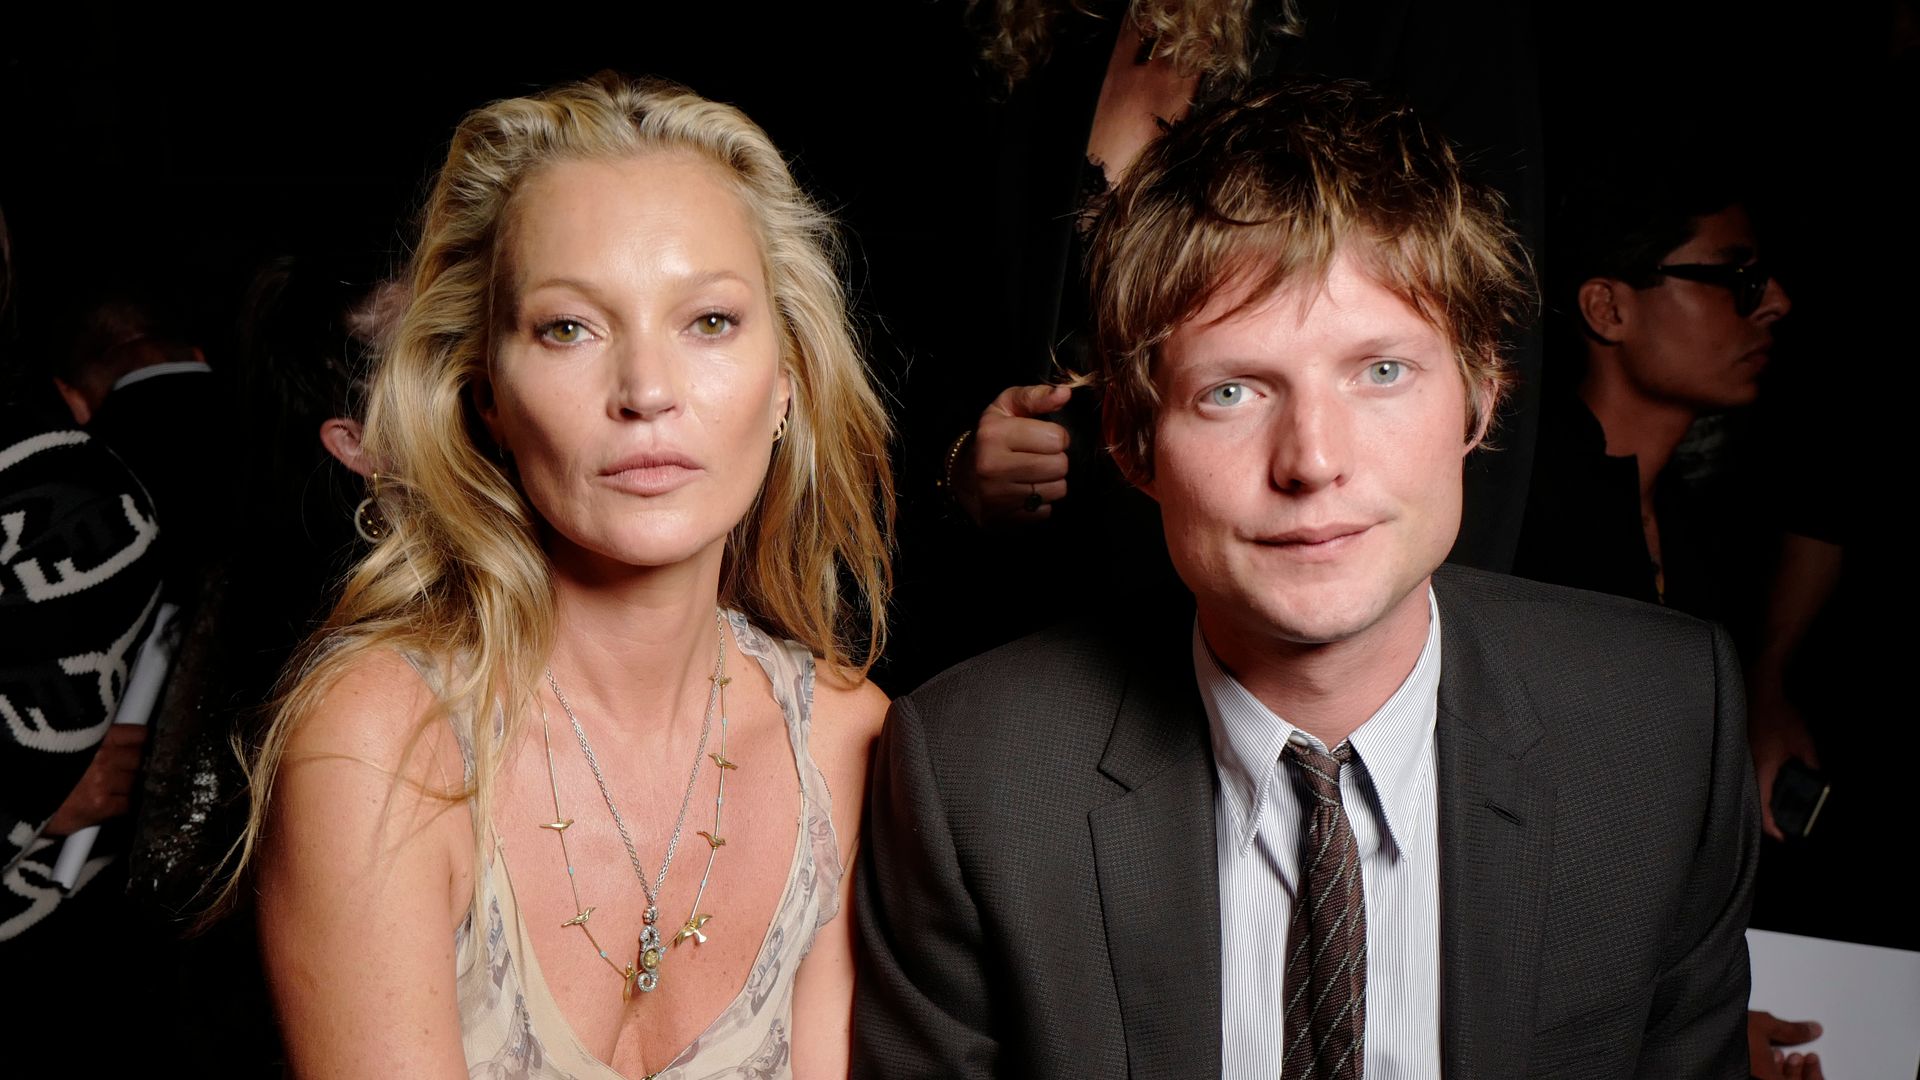 Kate Moss and Nikolai von Bismarck at the Front Row of the Fendi Spring 2023 fashion show at the Hammerstein Ballroom on September 9th, 2022 in New York City, New York. (Photo by Swan Gallet/WWD via Getty Images)